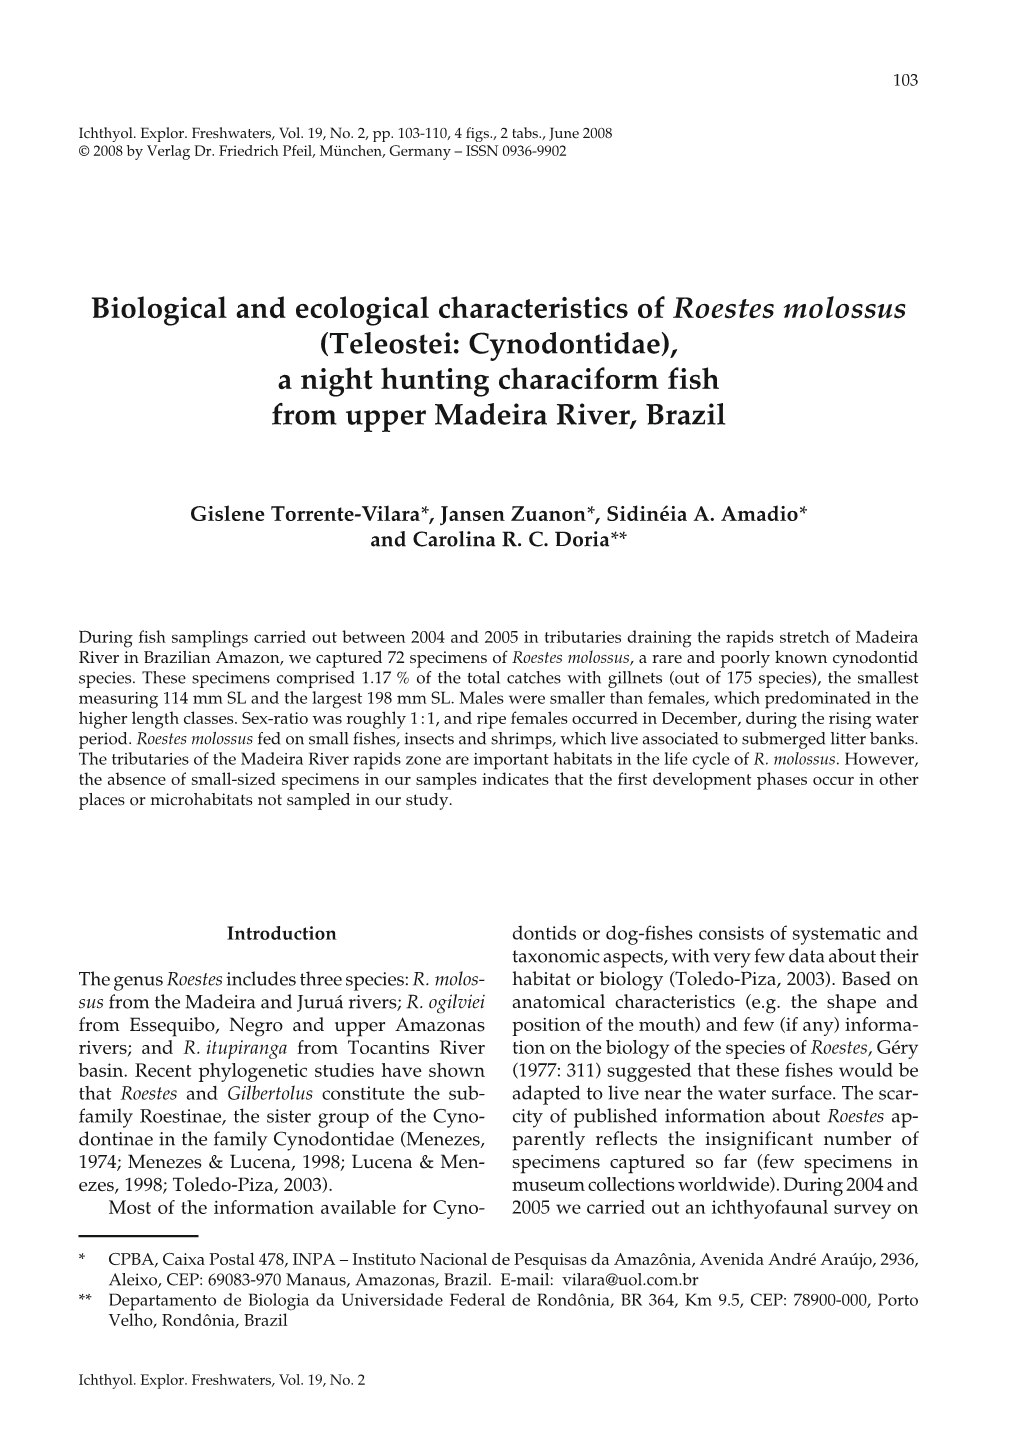 Biological and Ecological Characteristics of Roestes Molossus (Teleostei: Cynodontidae), a Night Hunting Characiform Fish from Upper Madeira River, Brazil